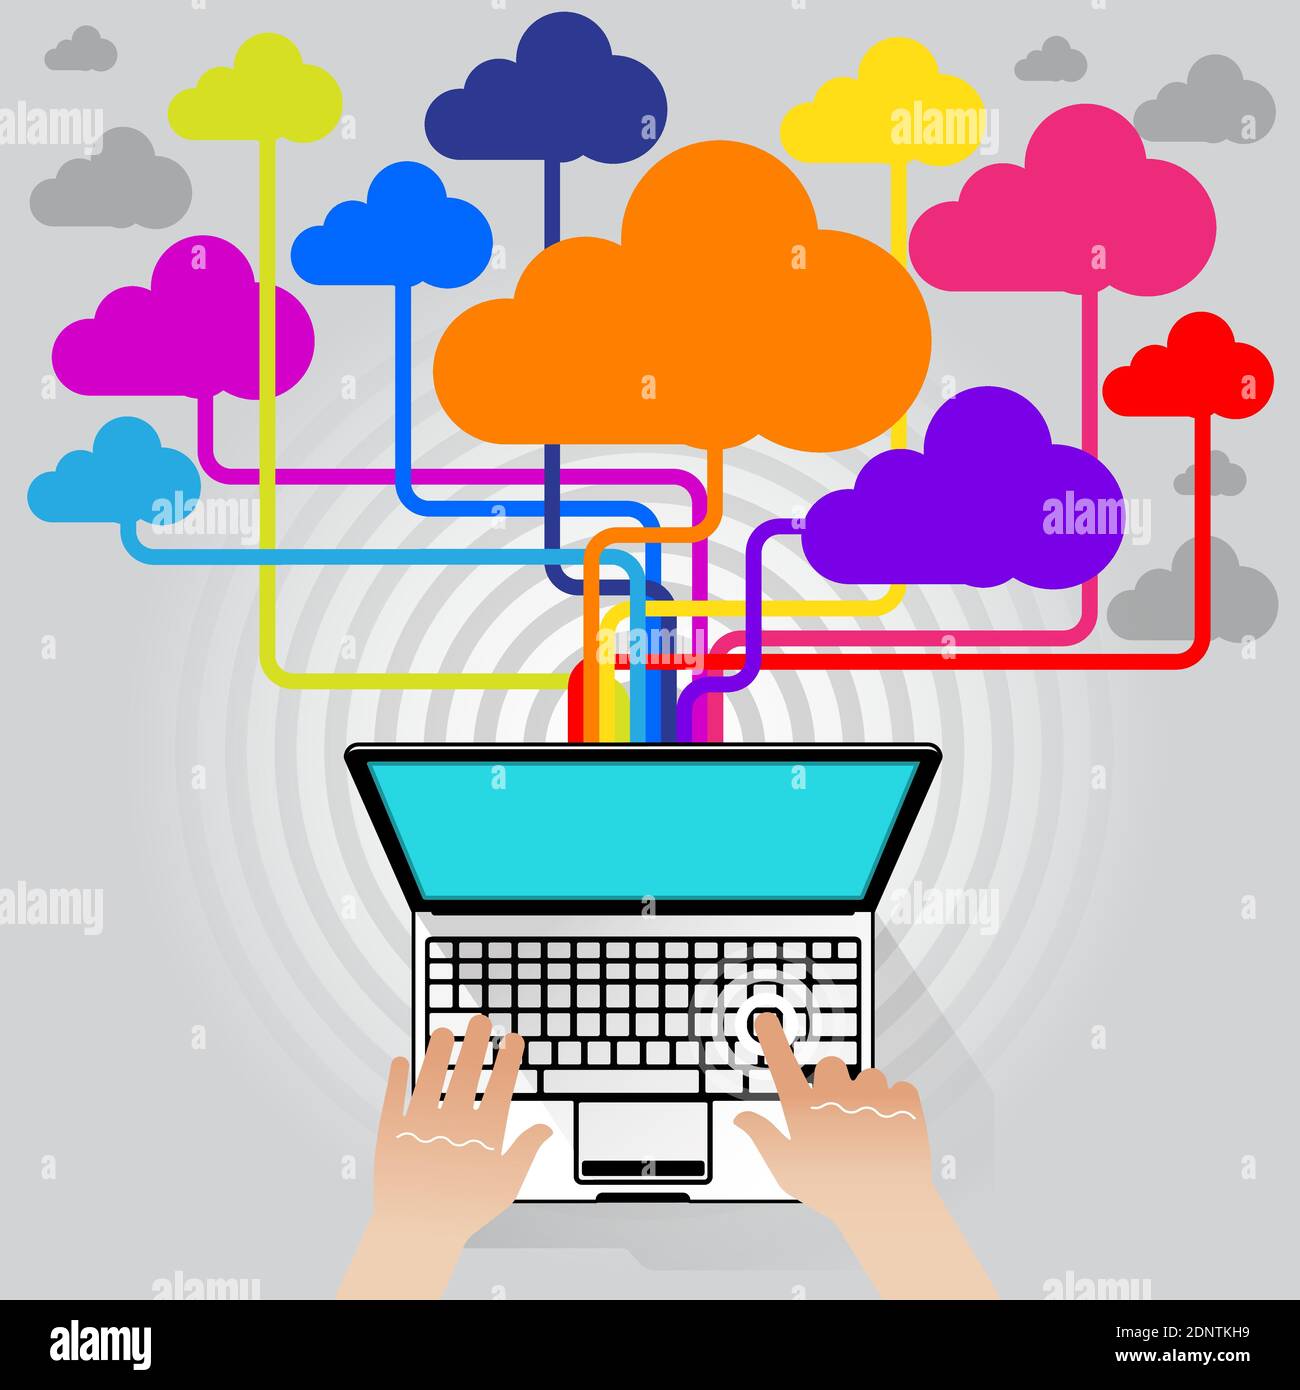 A top-down view of a Laptop computer streaming information and data to and from the internet at Super Hi Speeds via a 5G network connection. Stock Vector